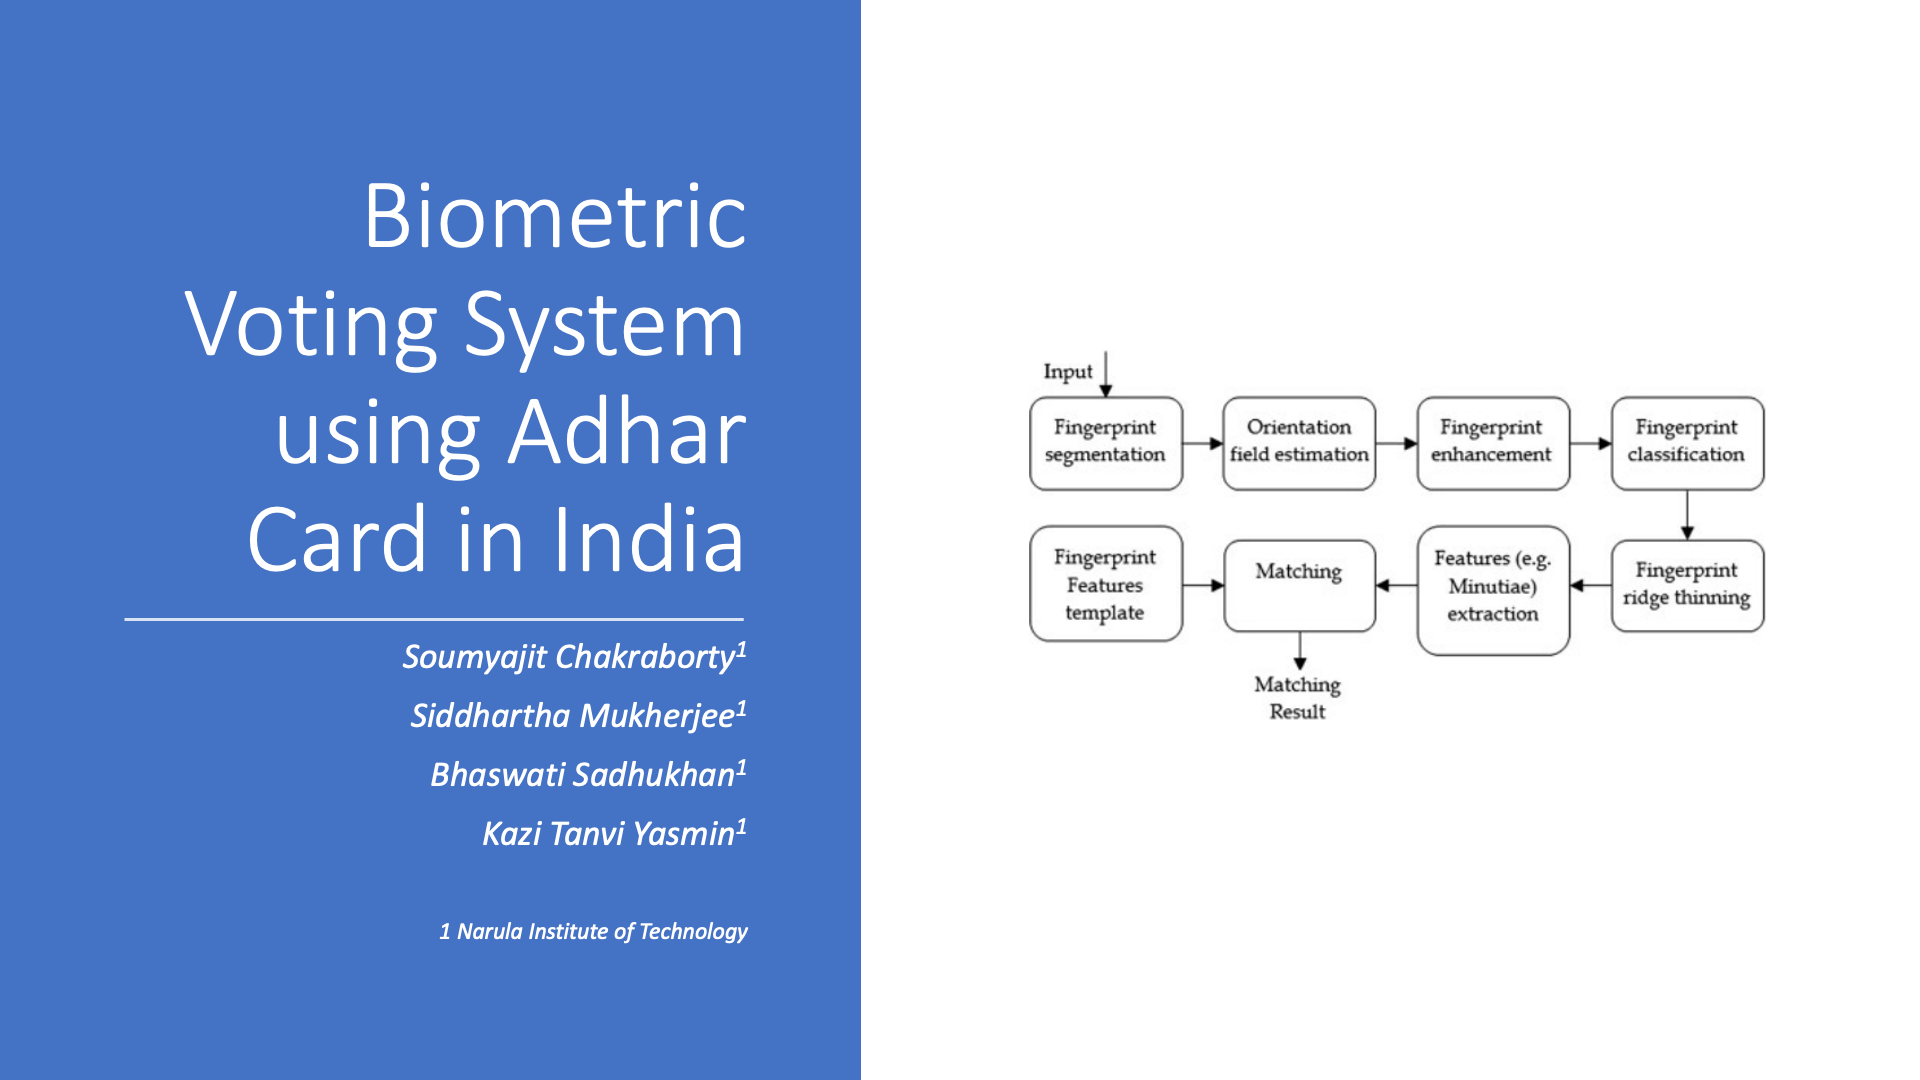 Biometric Voting System using Adhar Card in India